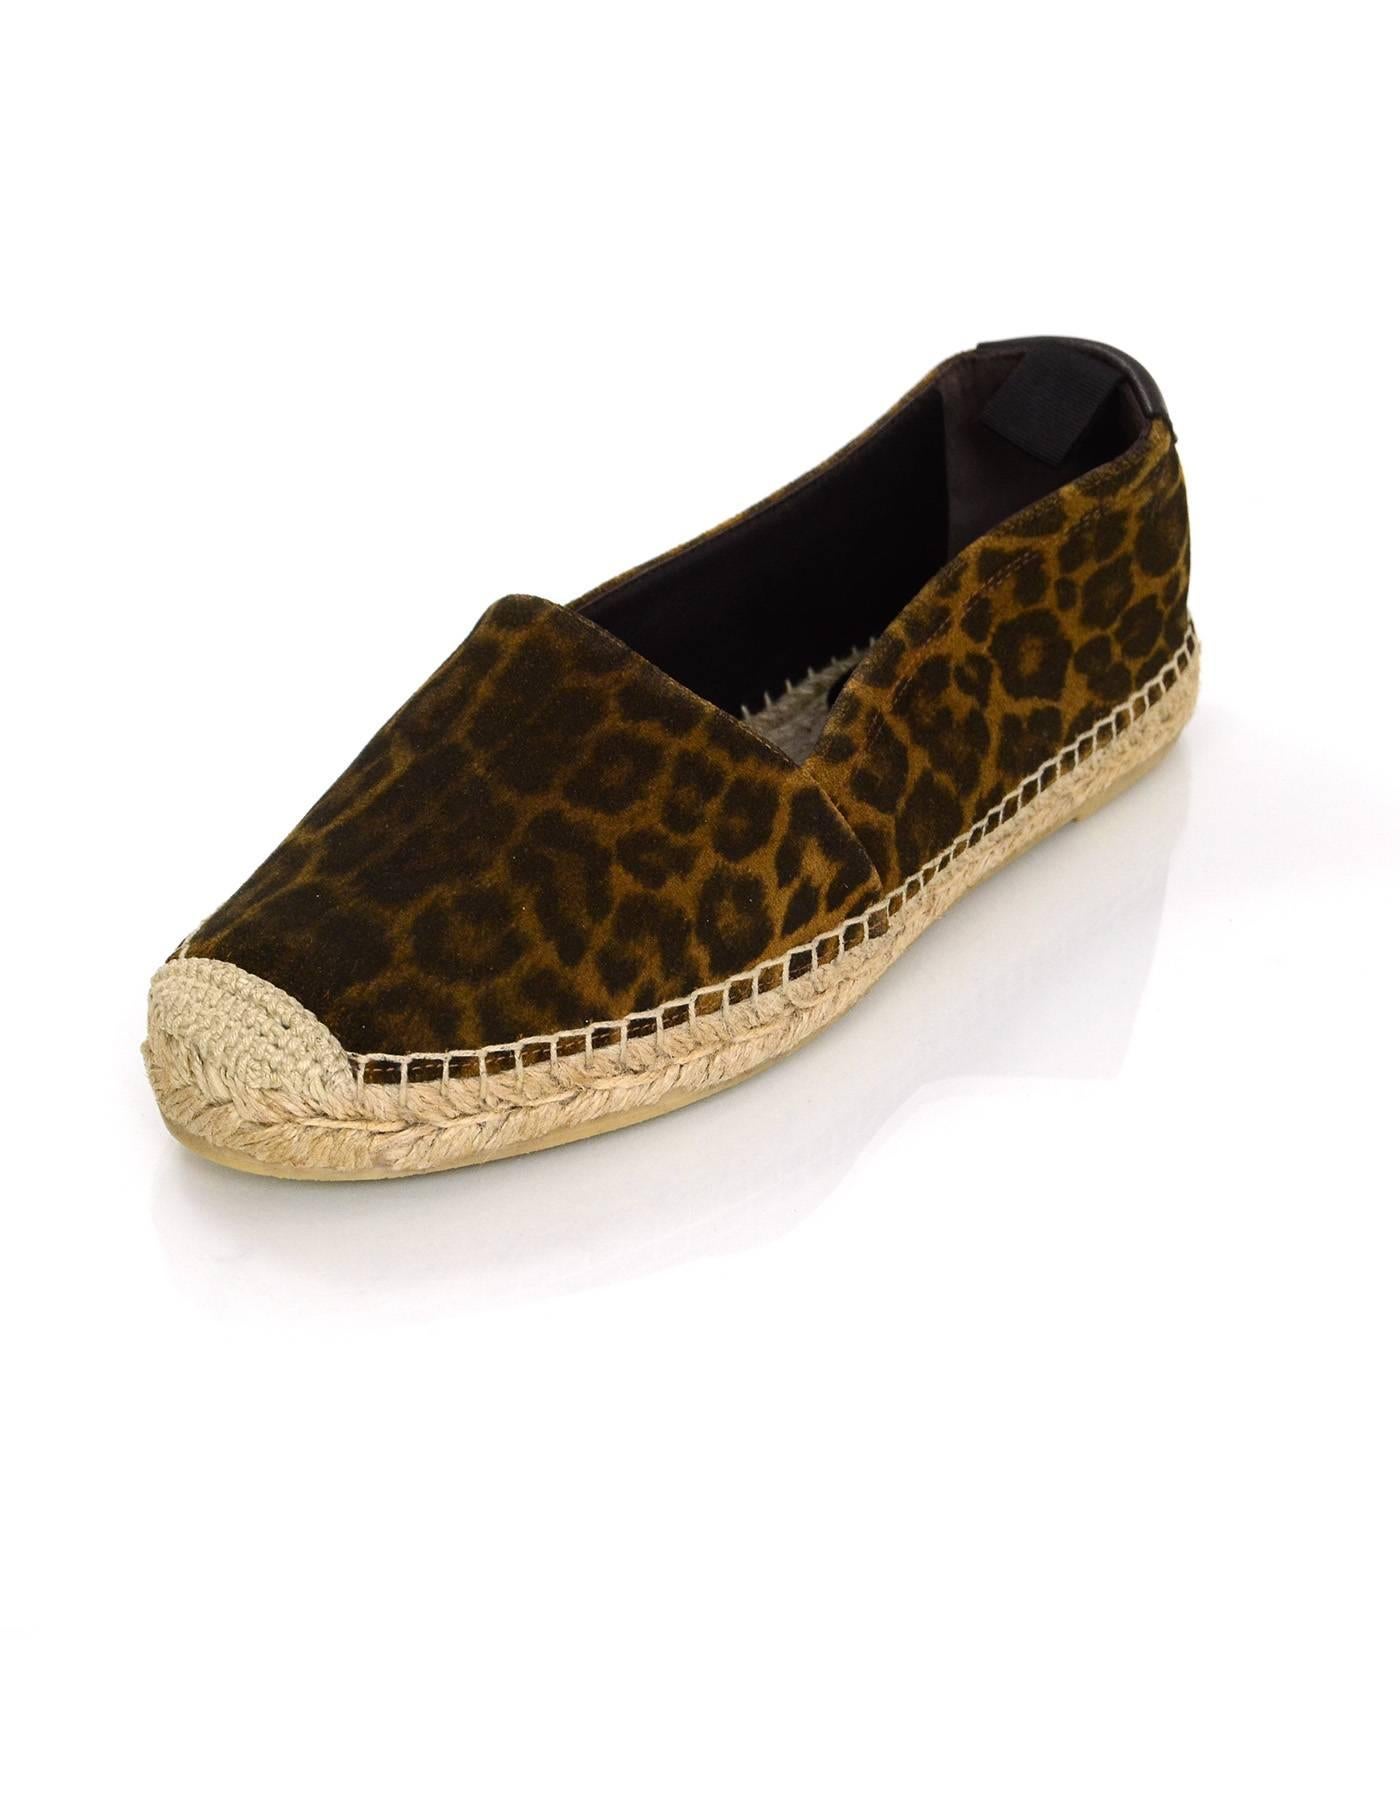 Saint Laurent NEW Leopard Print Espadrilles

Made In: Spain
Color: Brown leopard print
Materials: Suede
Closure/Opening: Slide on
Sole Stamp: Saint Laurent Paris 
Retail Price: $475 + tax
Overall Condition: Excellent- like new
Includes: Saint